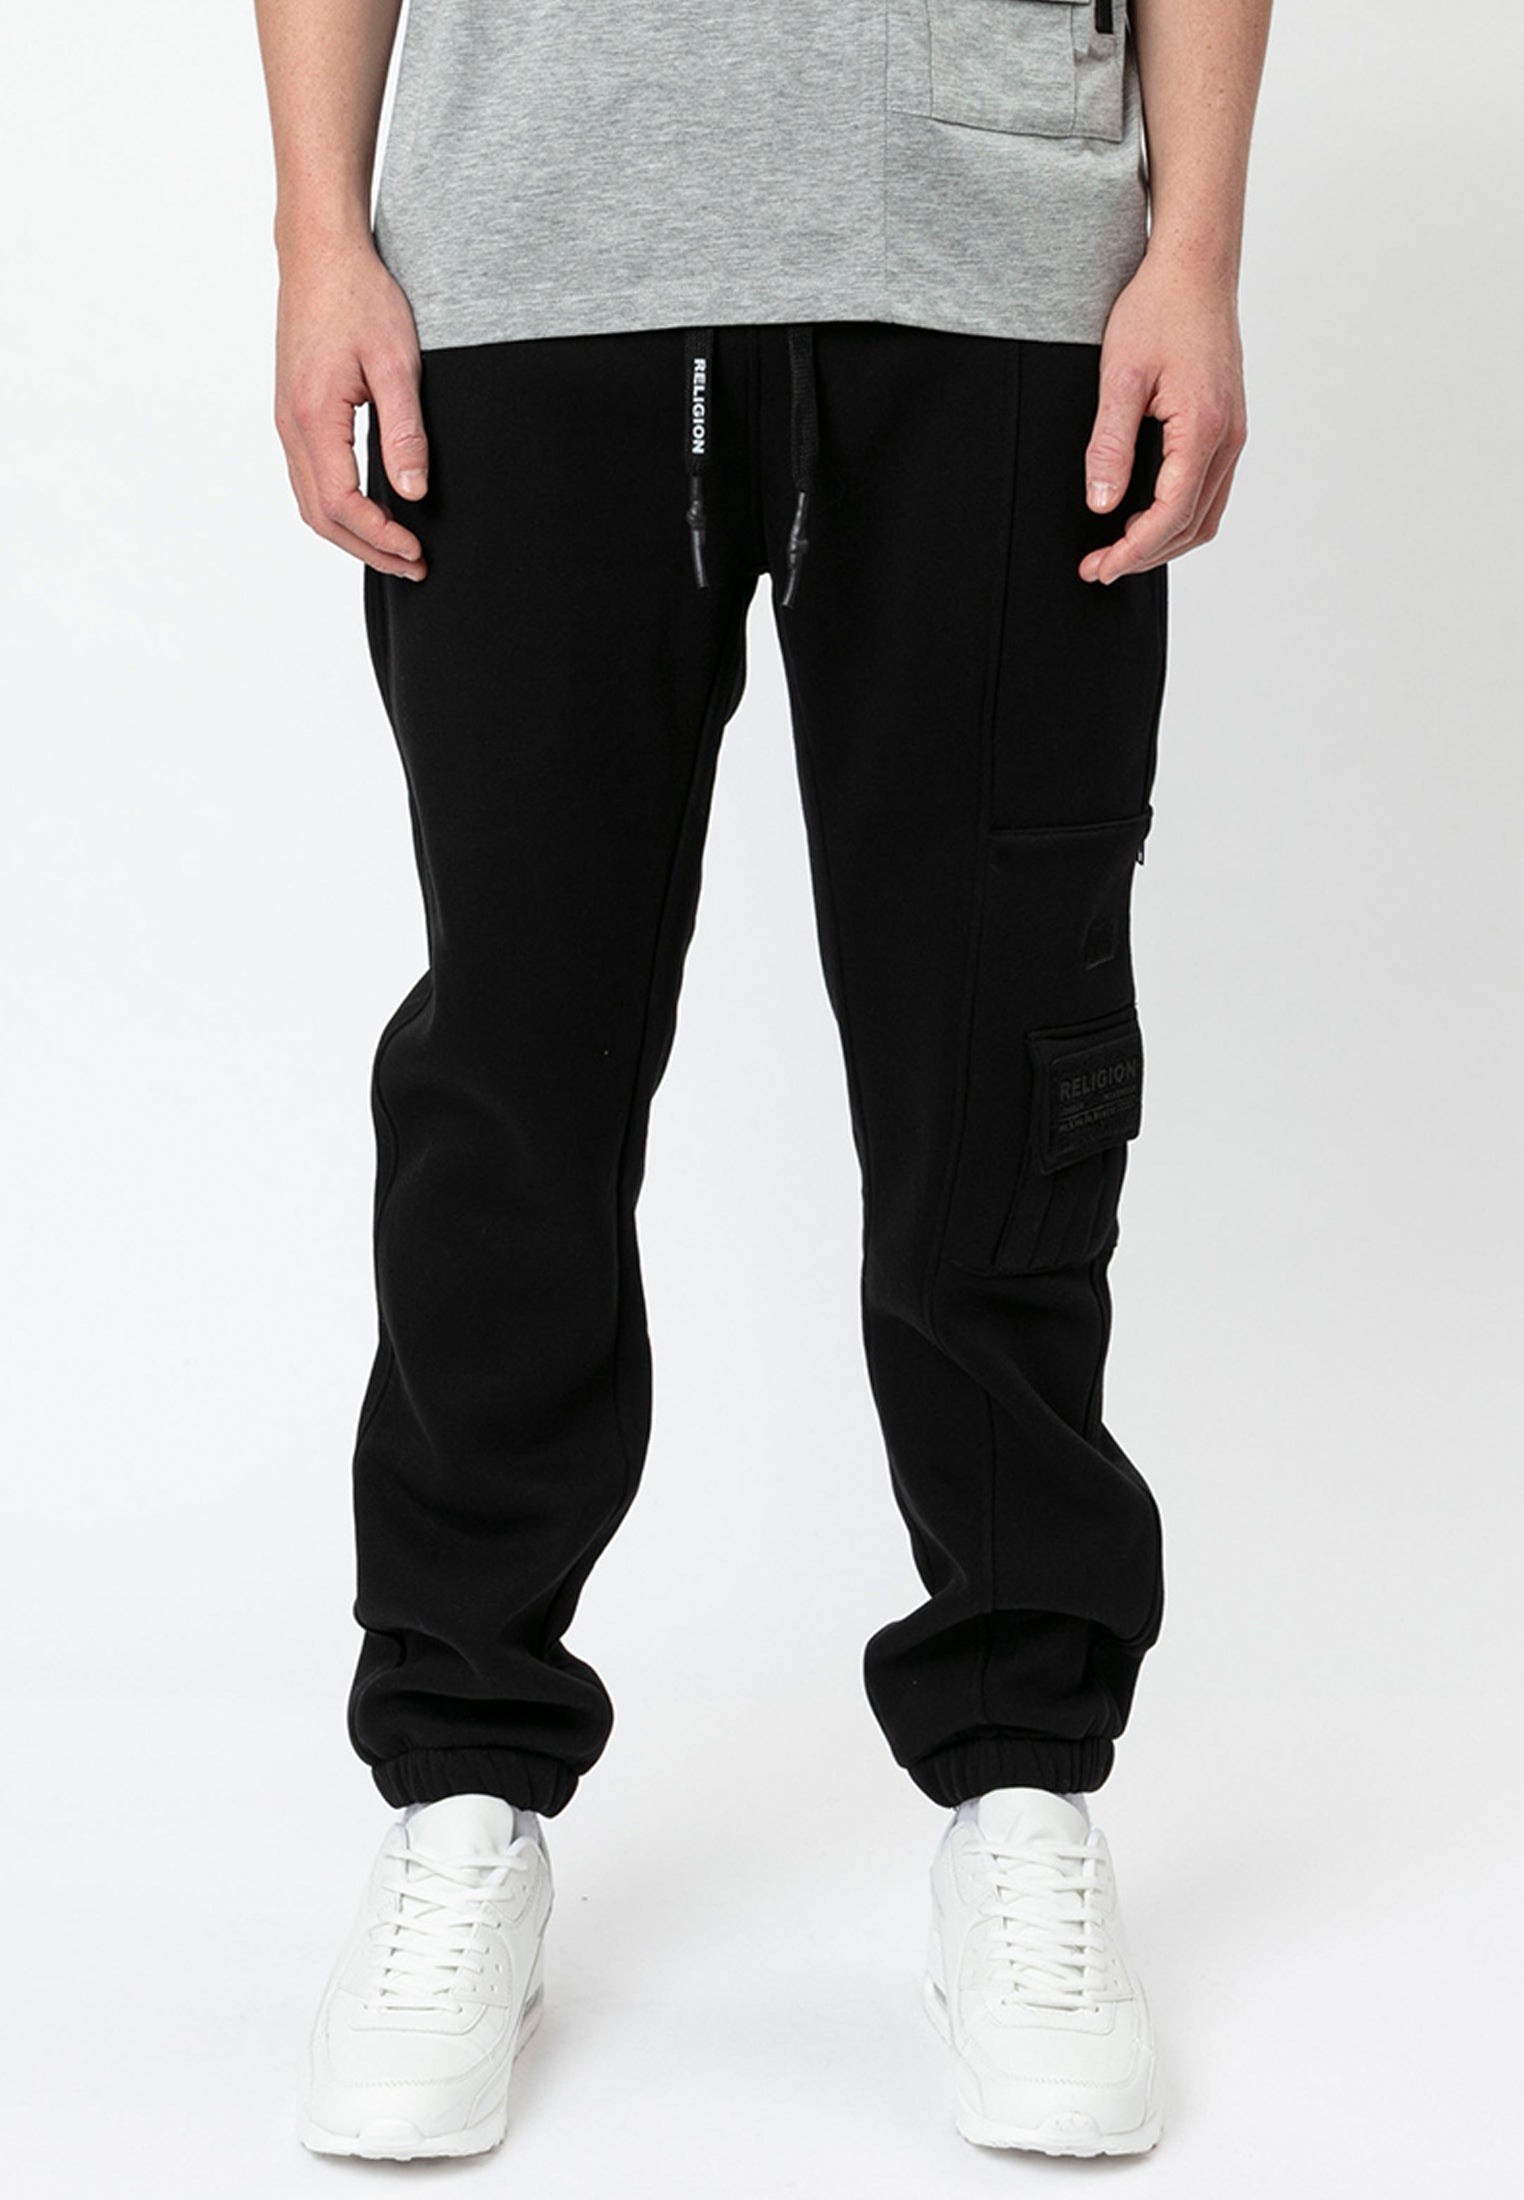 RELIGION Edition Relaxed Fit Black Pants